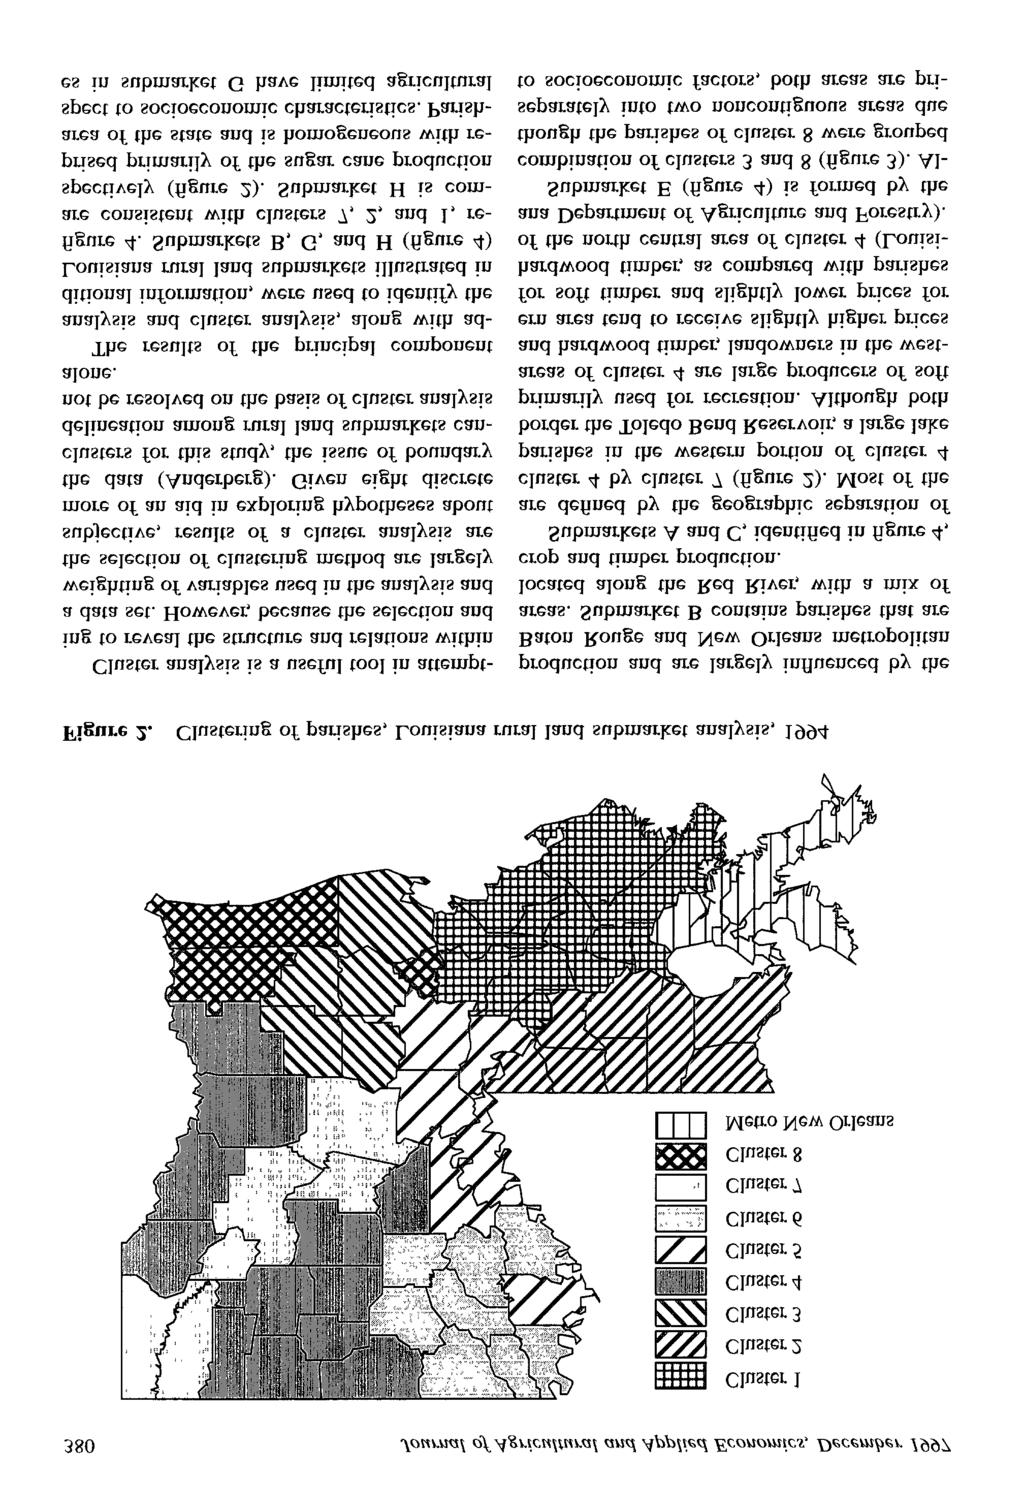 38 Journal of Agricultural and Applied Economics, December 1997 Figure 2.